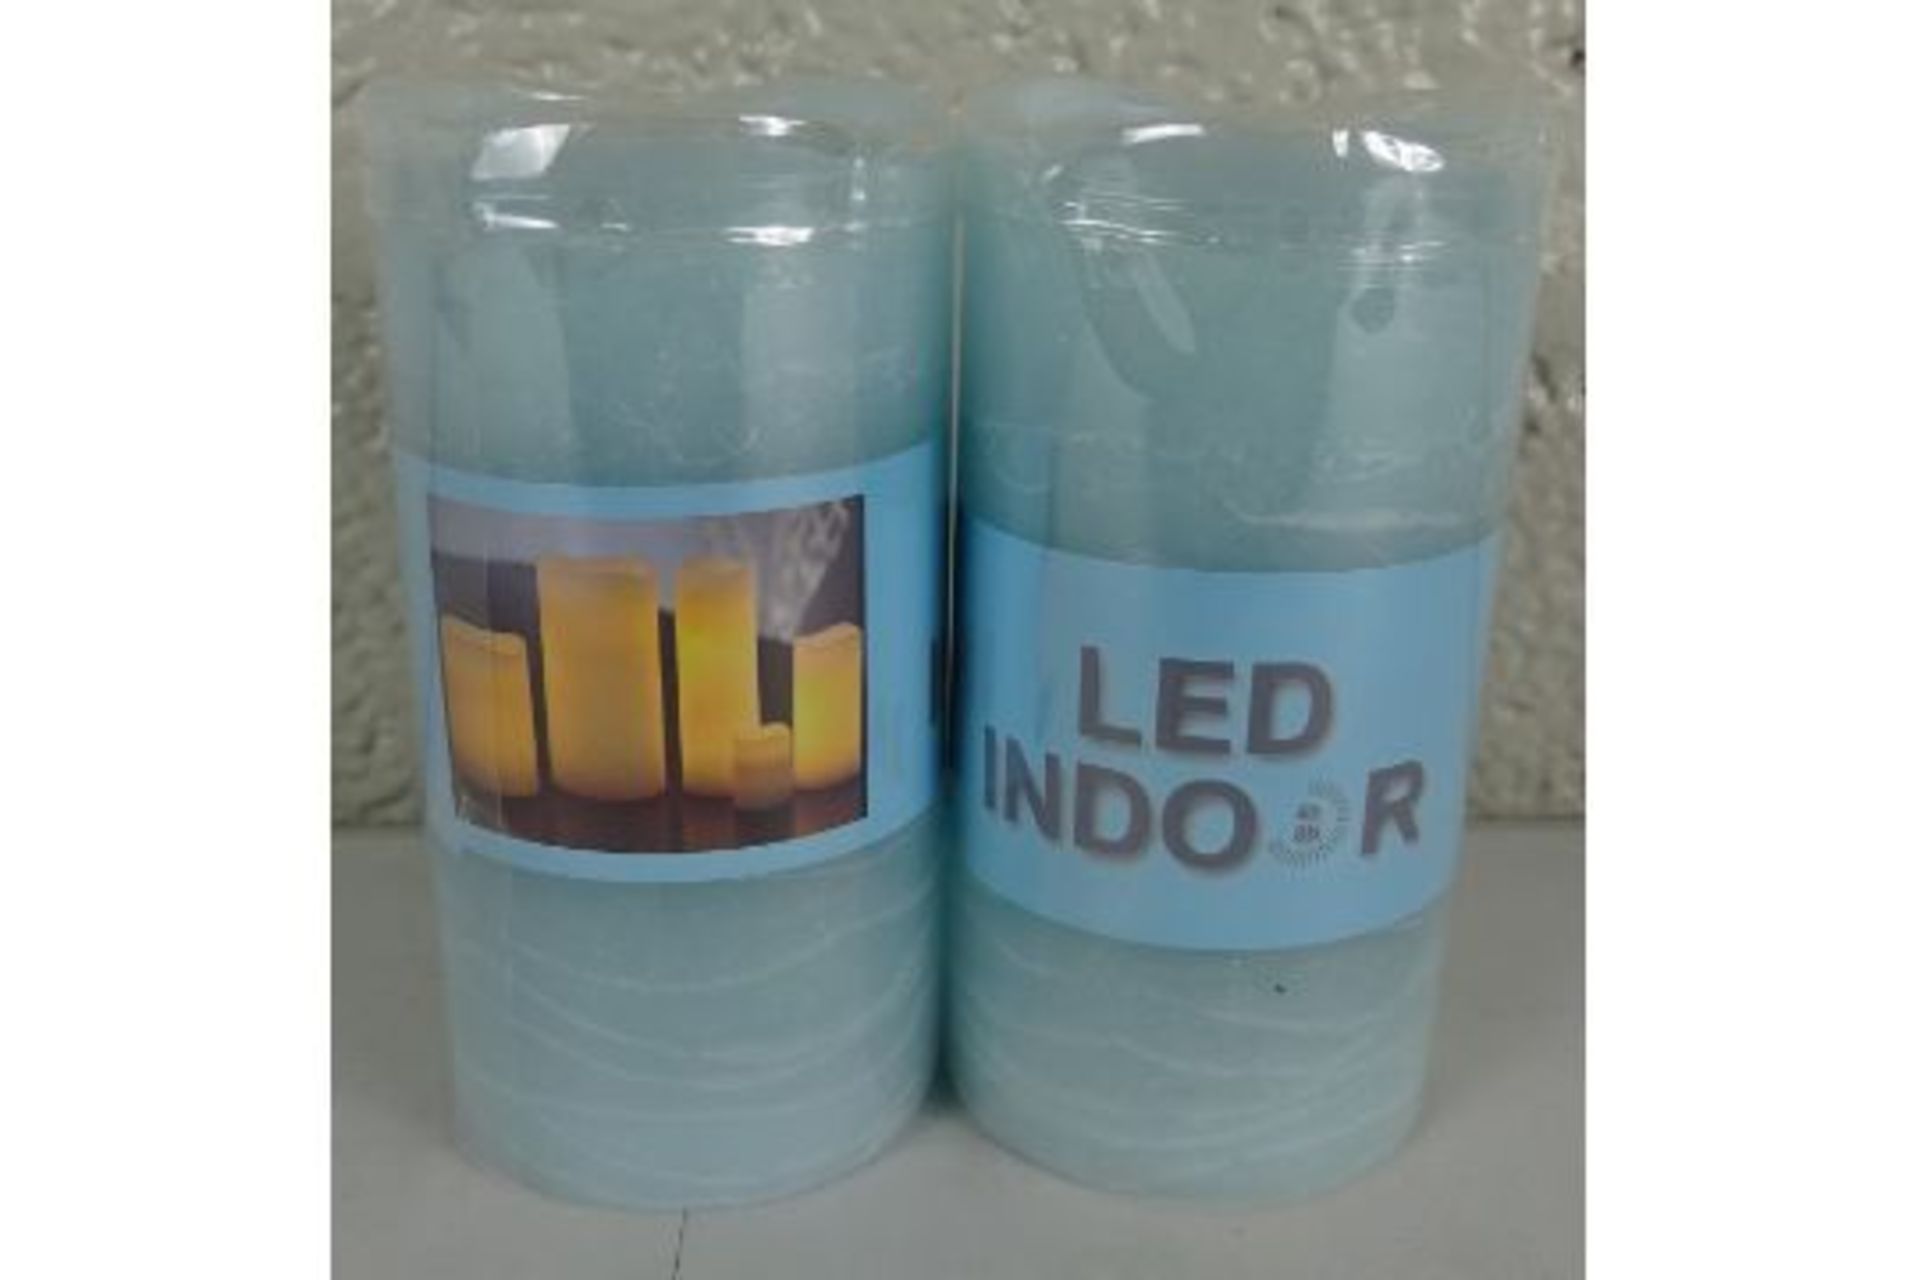 BRAND NEW BLUE WAX LED INDOOR BATTERY POWERED CANDLES X2